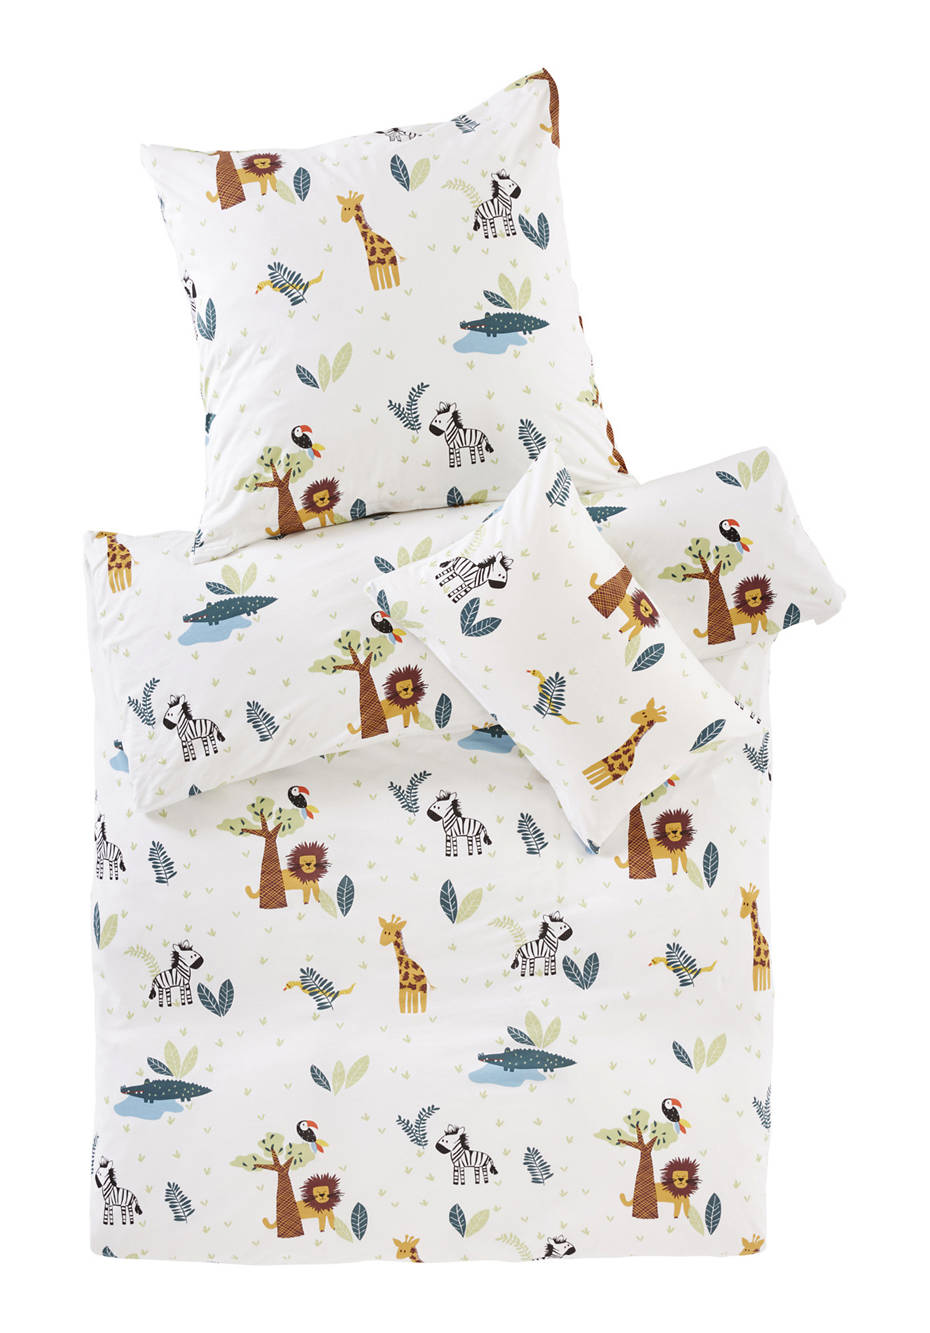 Baby and children's bedding jersey made from pure organic cotton